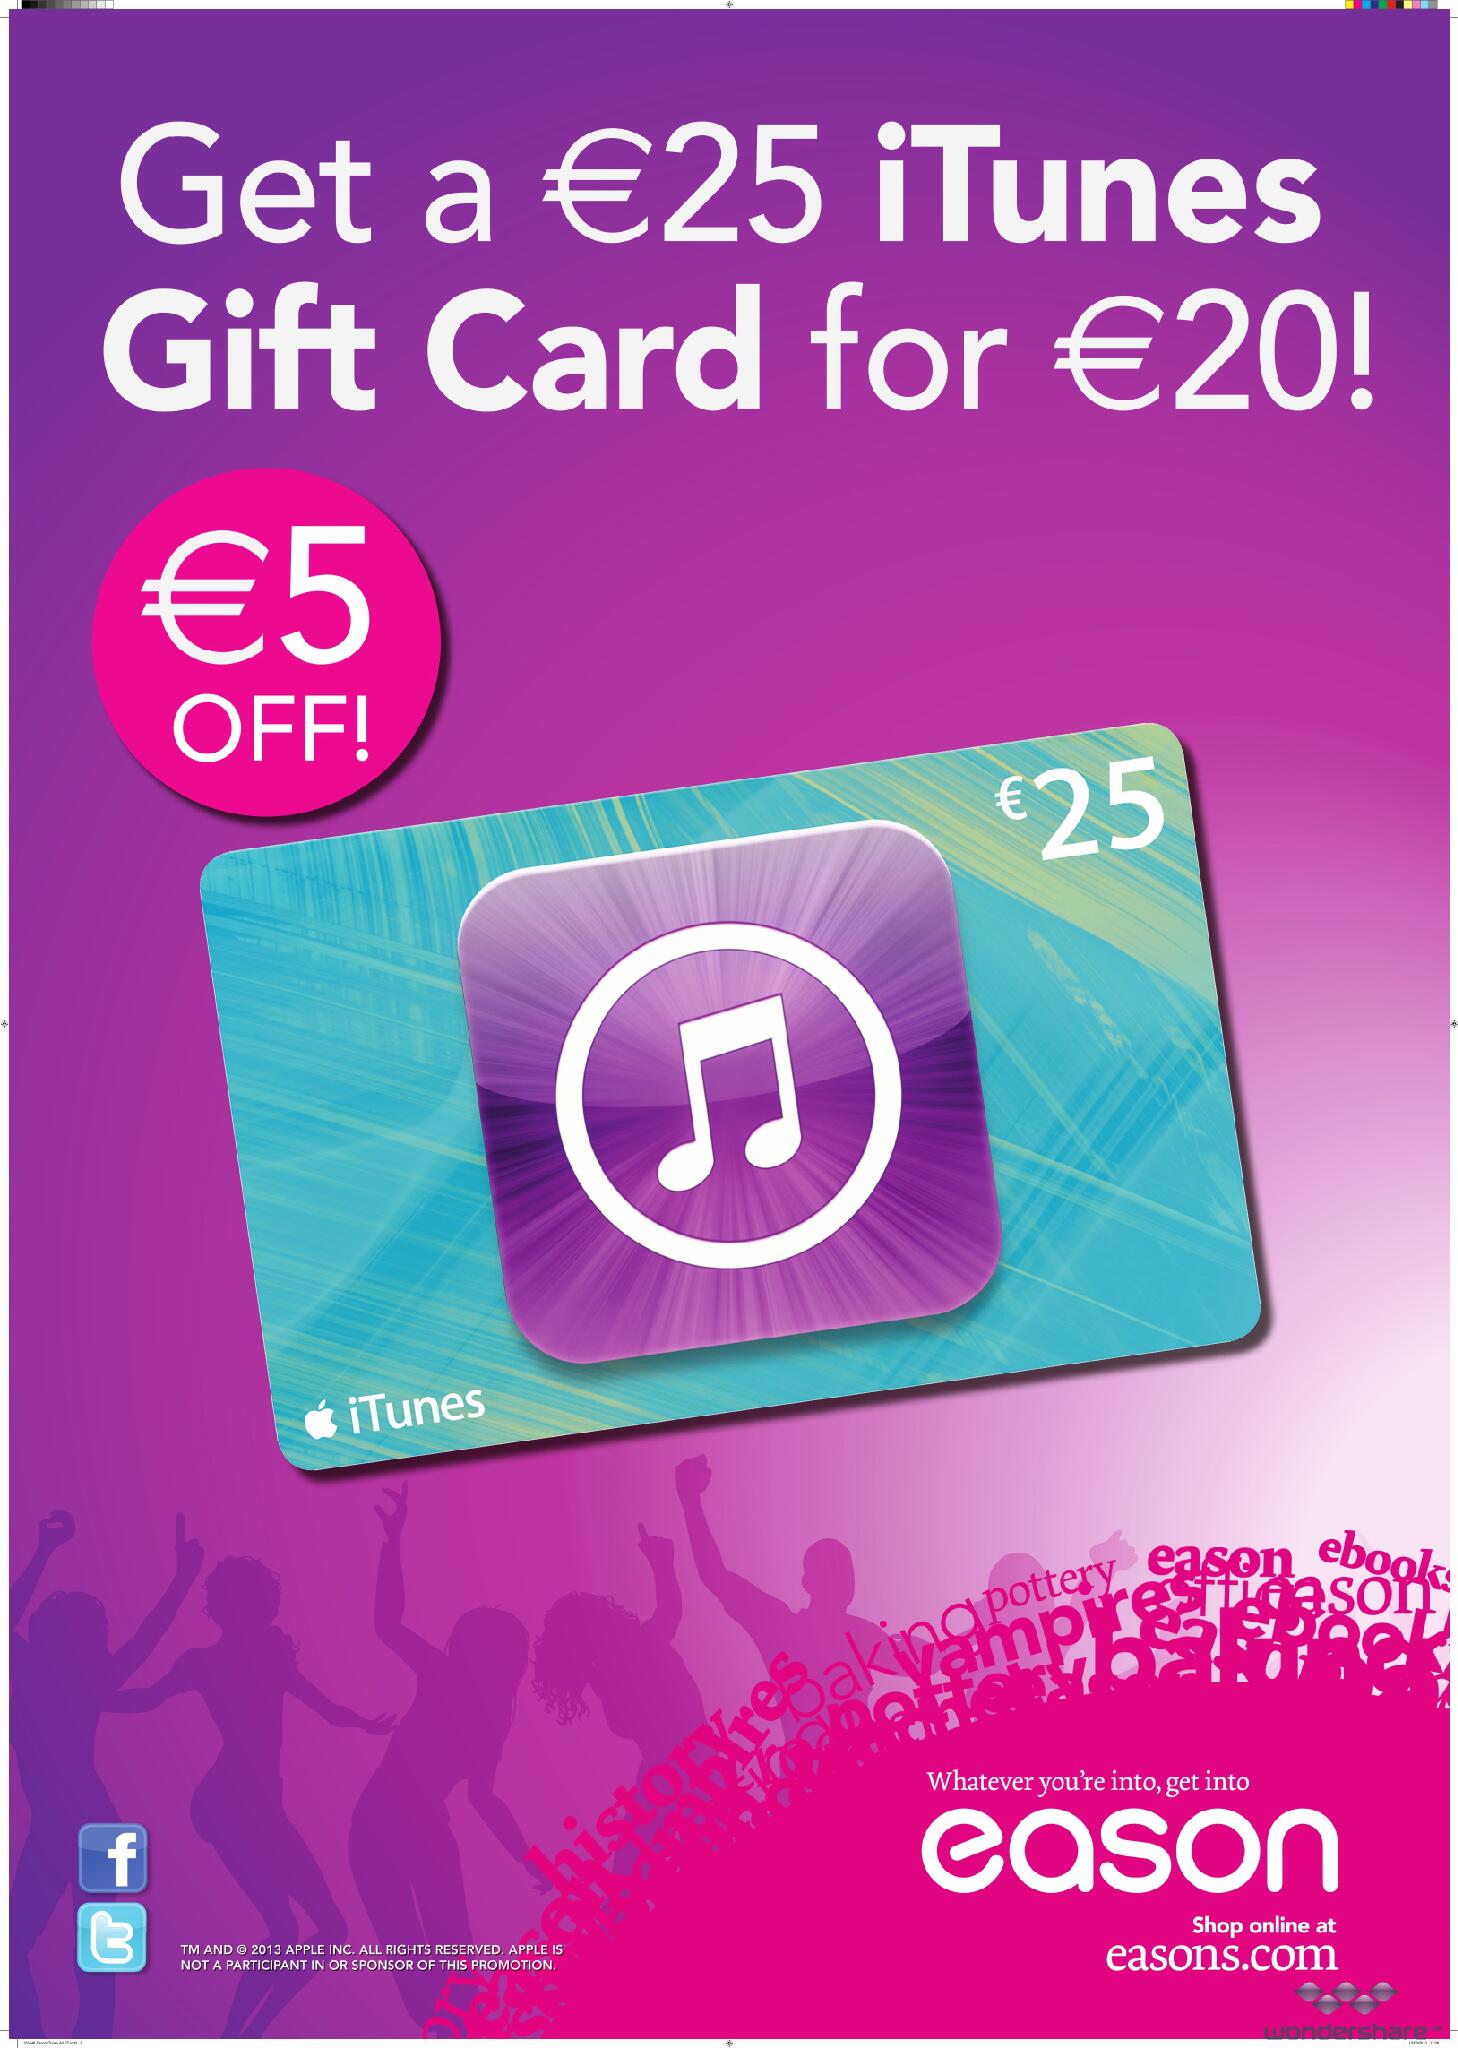 Mars shuttle kijken Eason on Twitter: "Get a €25 iTunes card for only €20 in selected stores  right now. #Bargain http://t.co/MIfTok8n9s" / Twitter